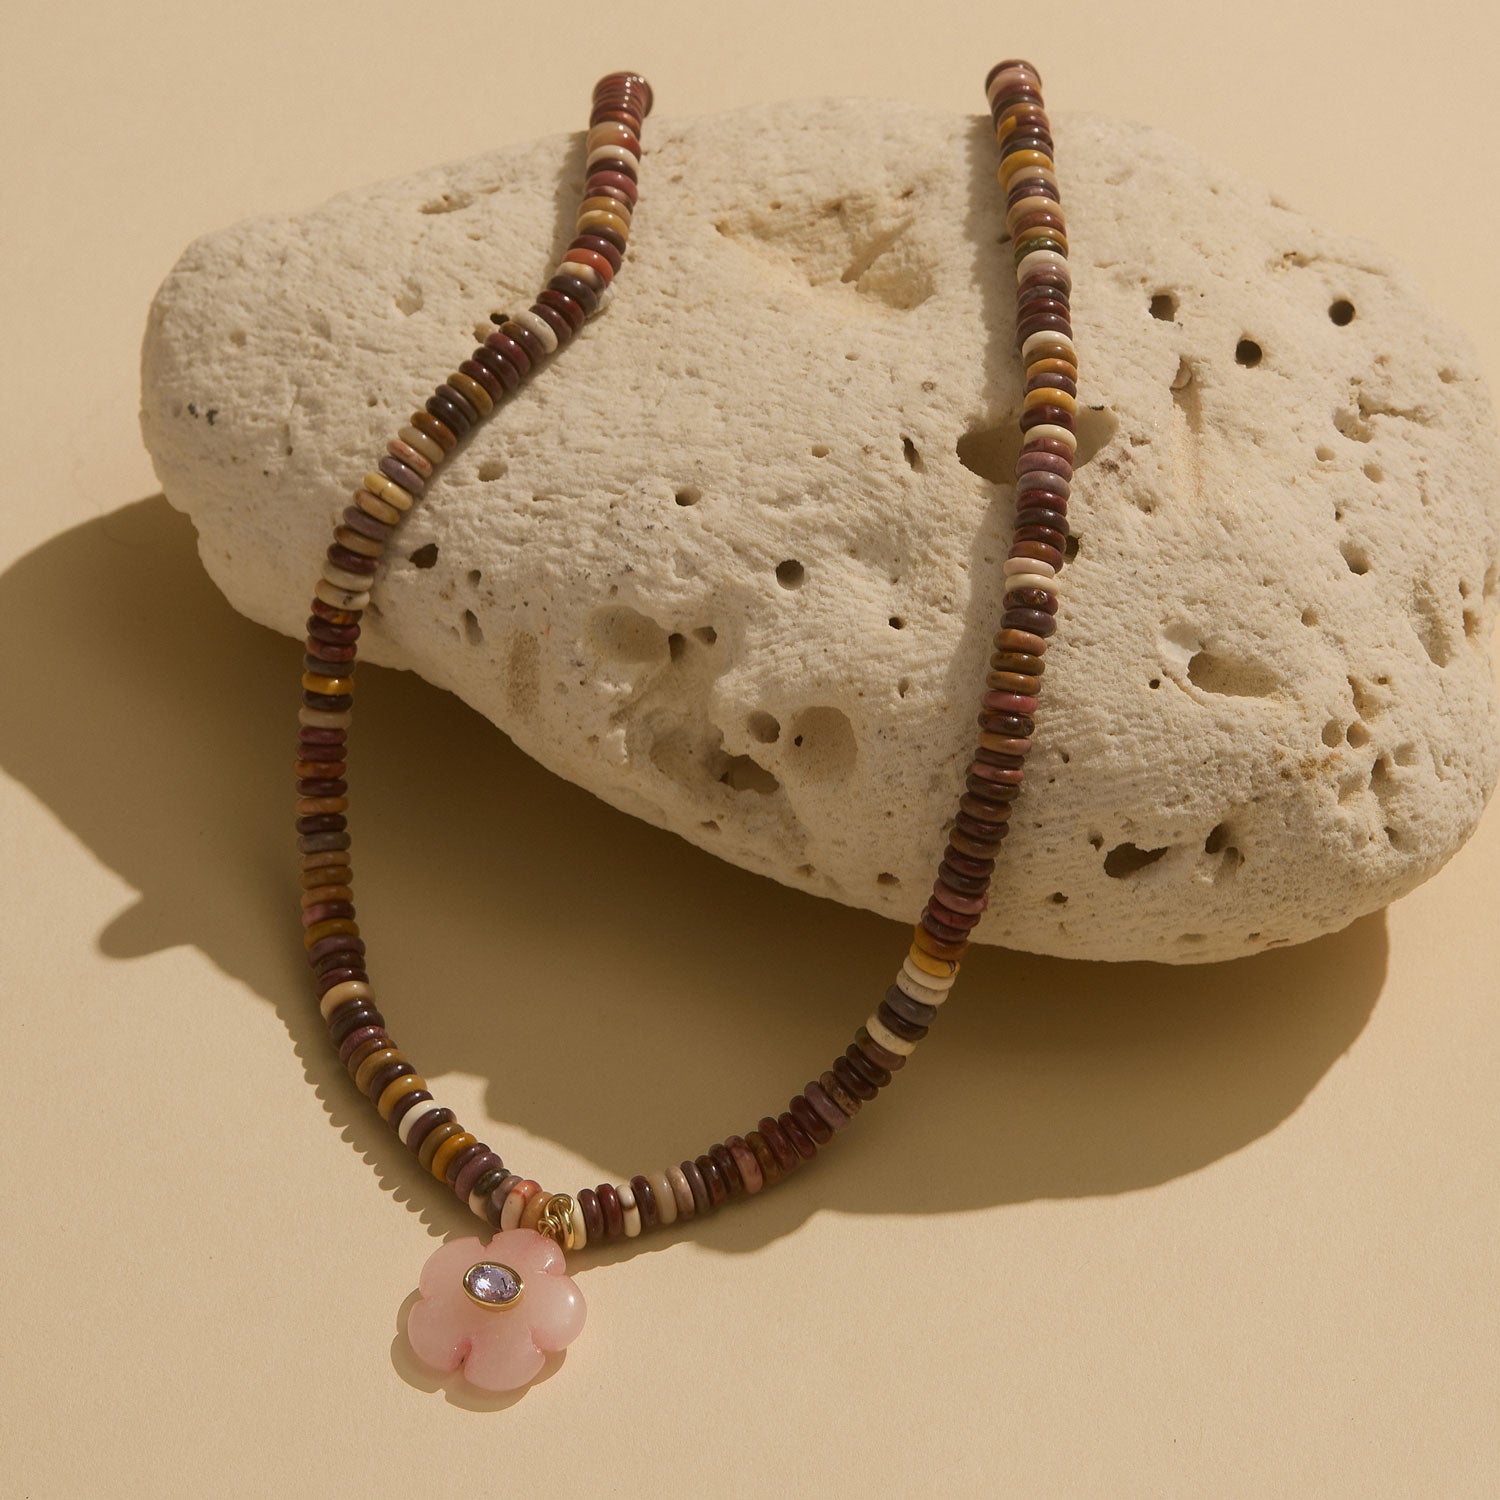 Brown Beaded Strand Necklace with Pink Flower Charm on Cream Coral Staged on Flat Cream Background